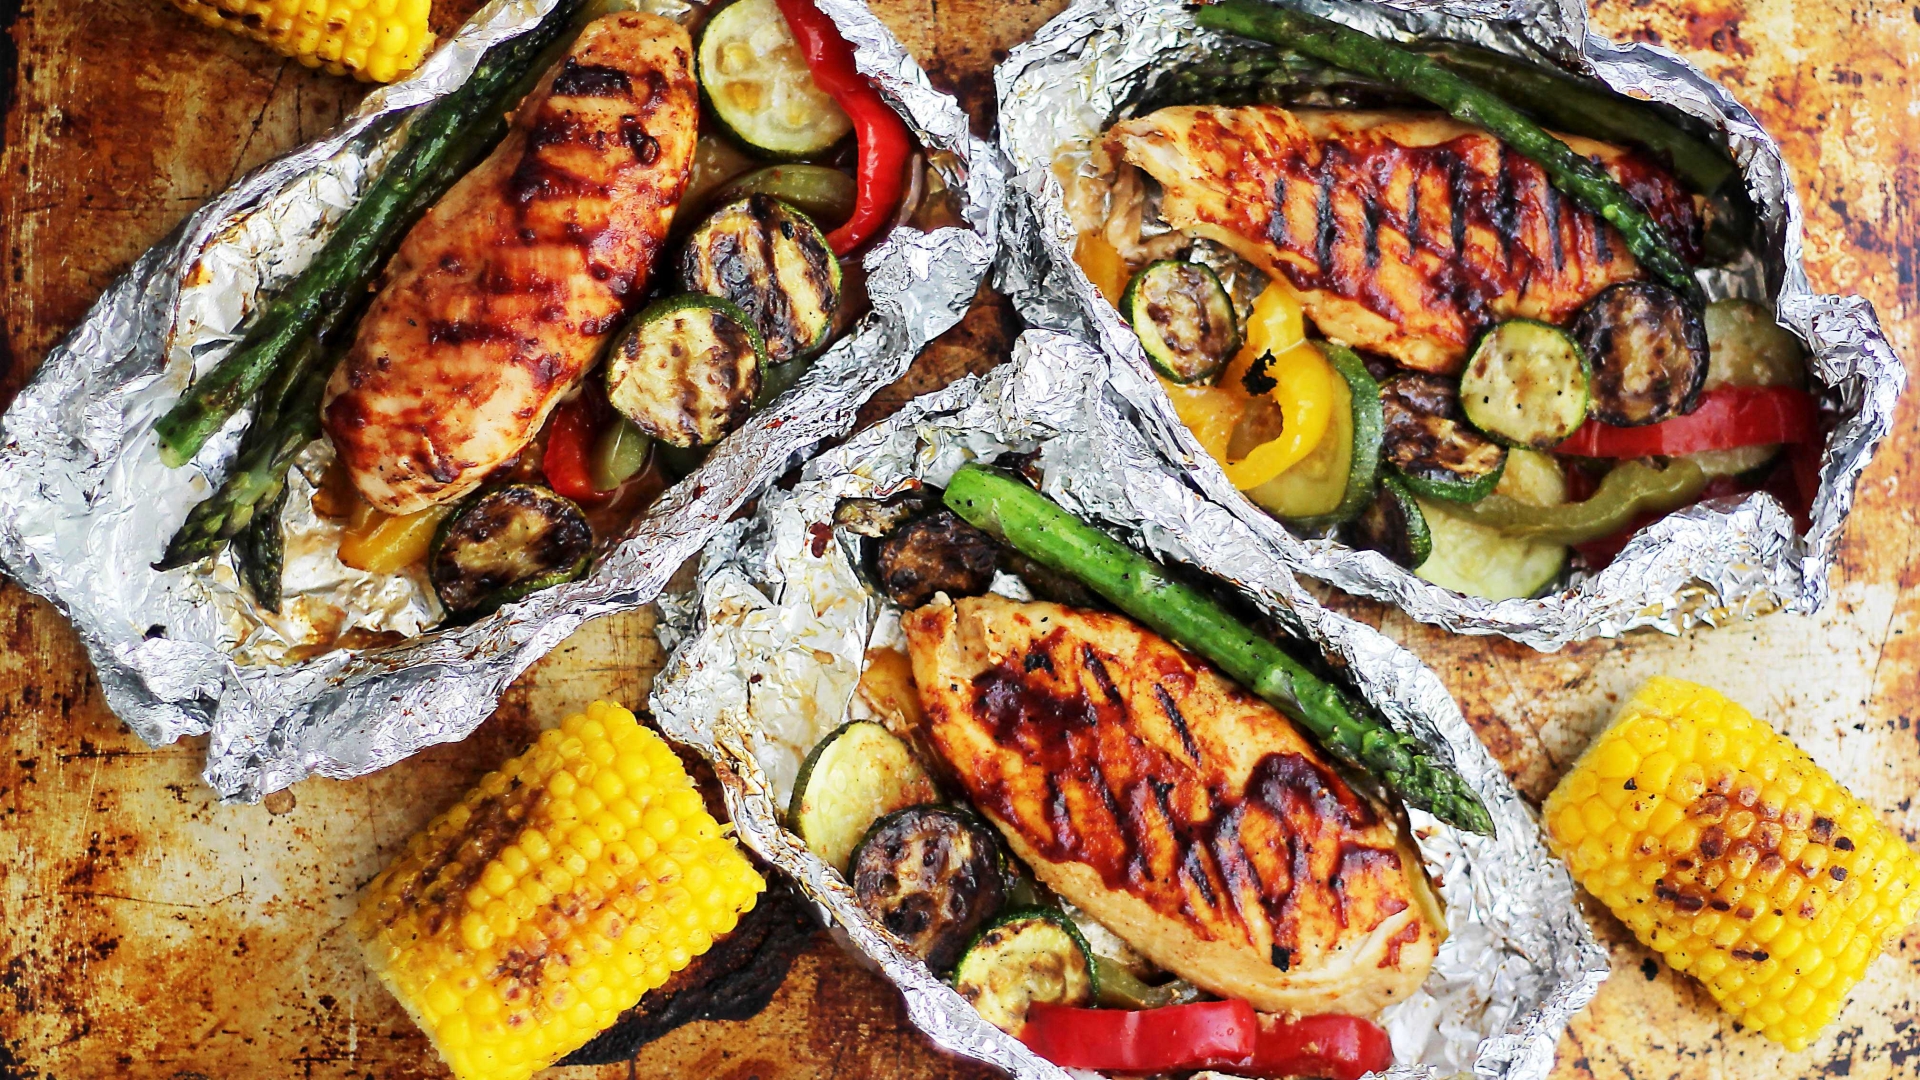 Grilled Chicken on a foil basket with corn and asparagus